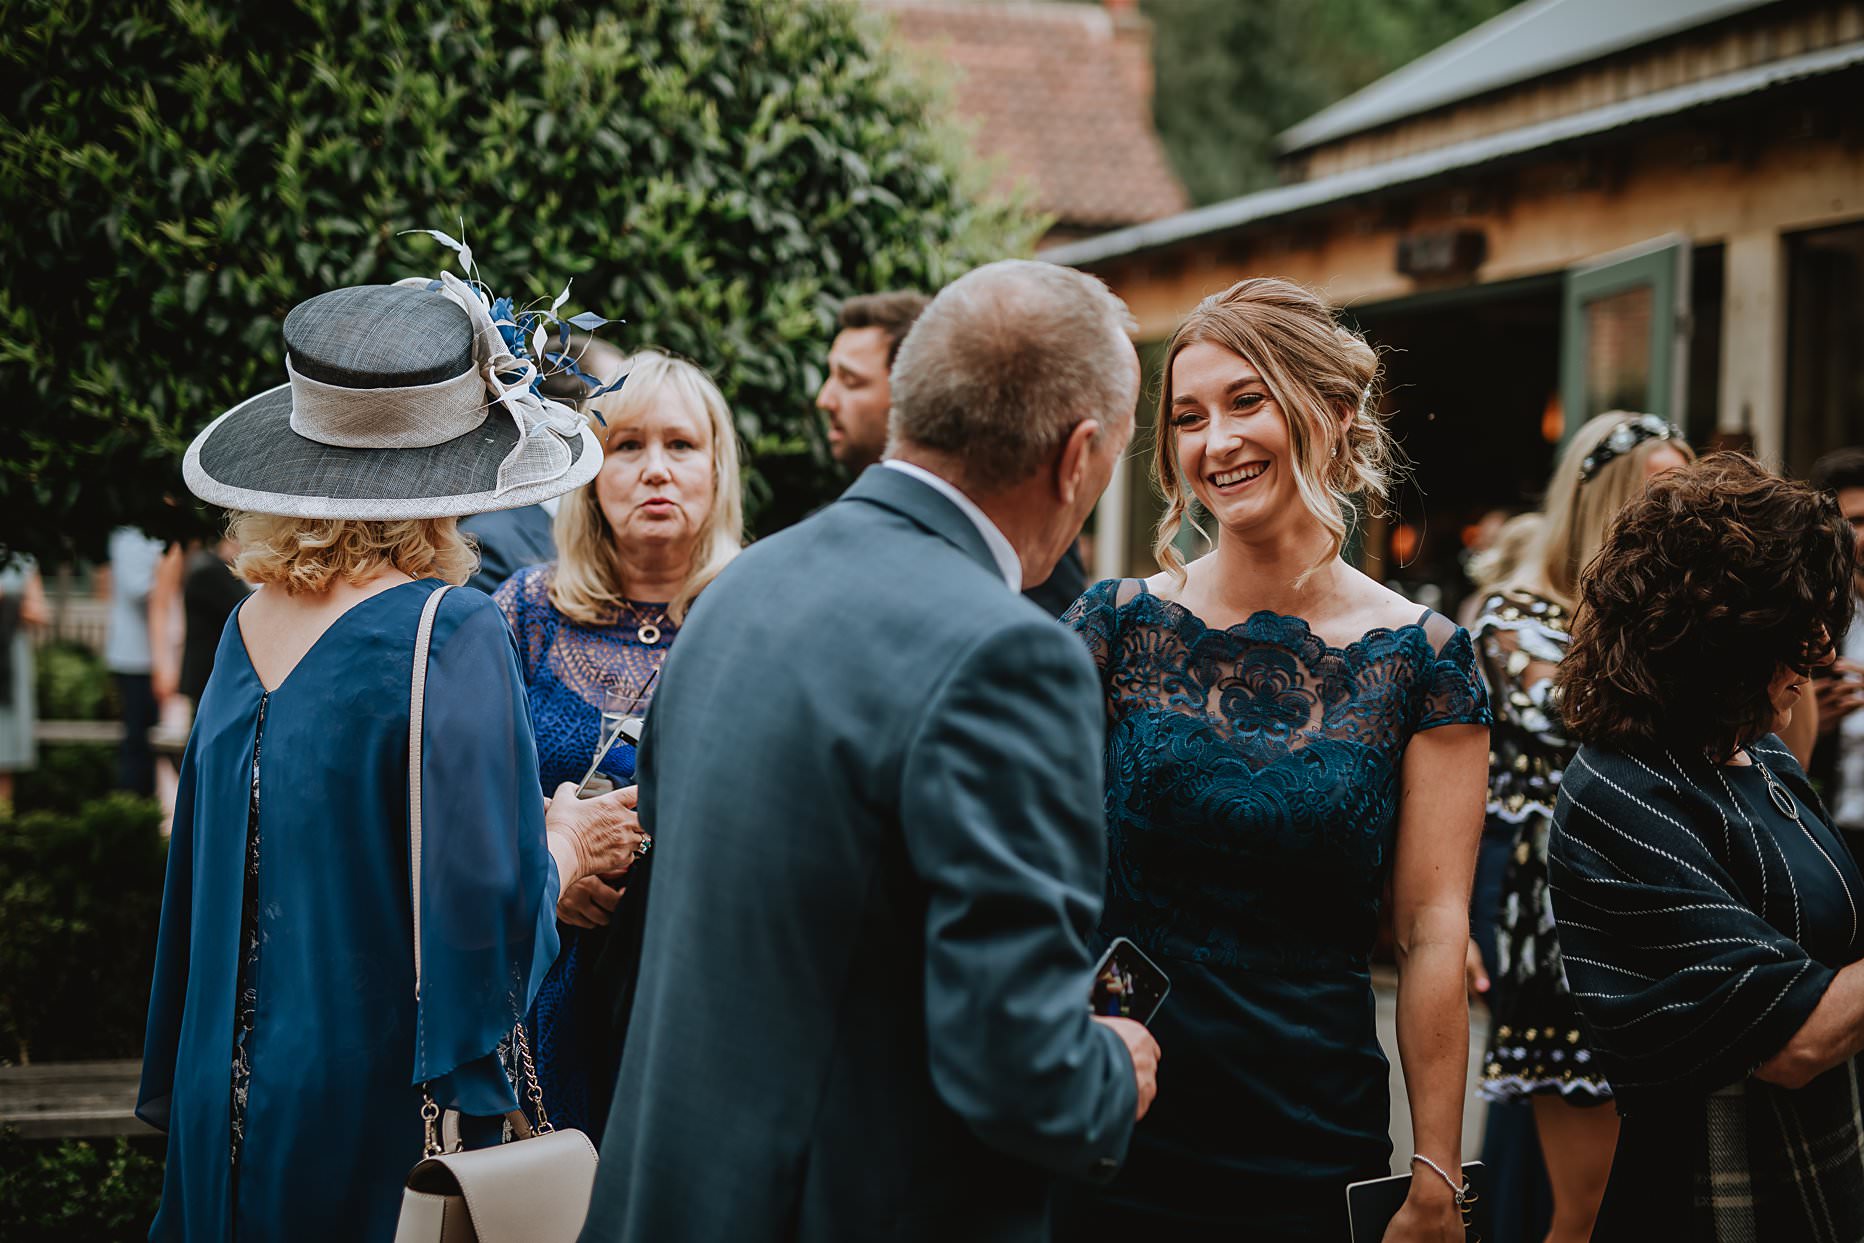 Bridesmaid chatting to other wedding guests in the courtyard at Hazel Gap Barn.